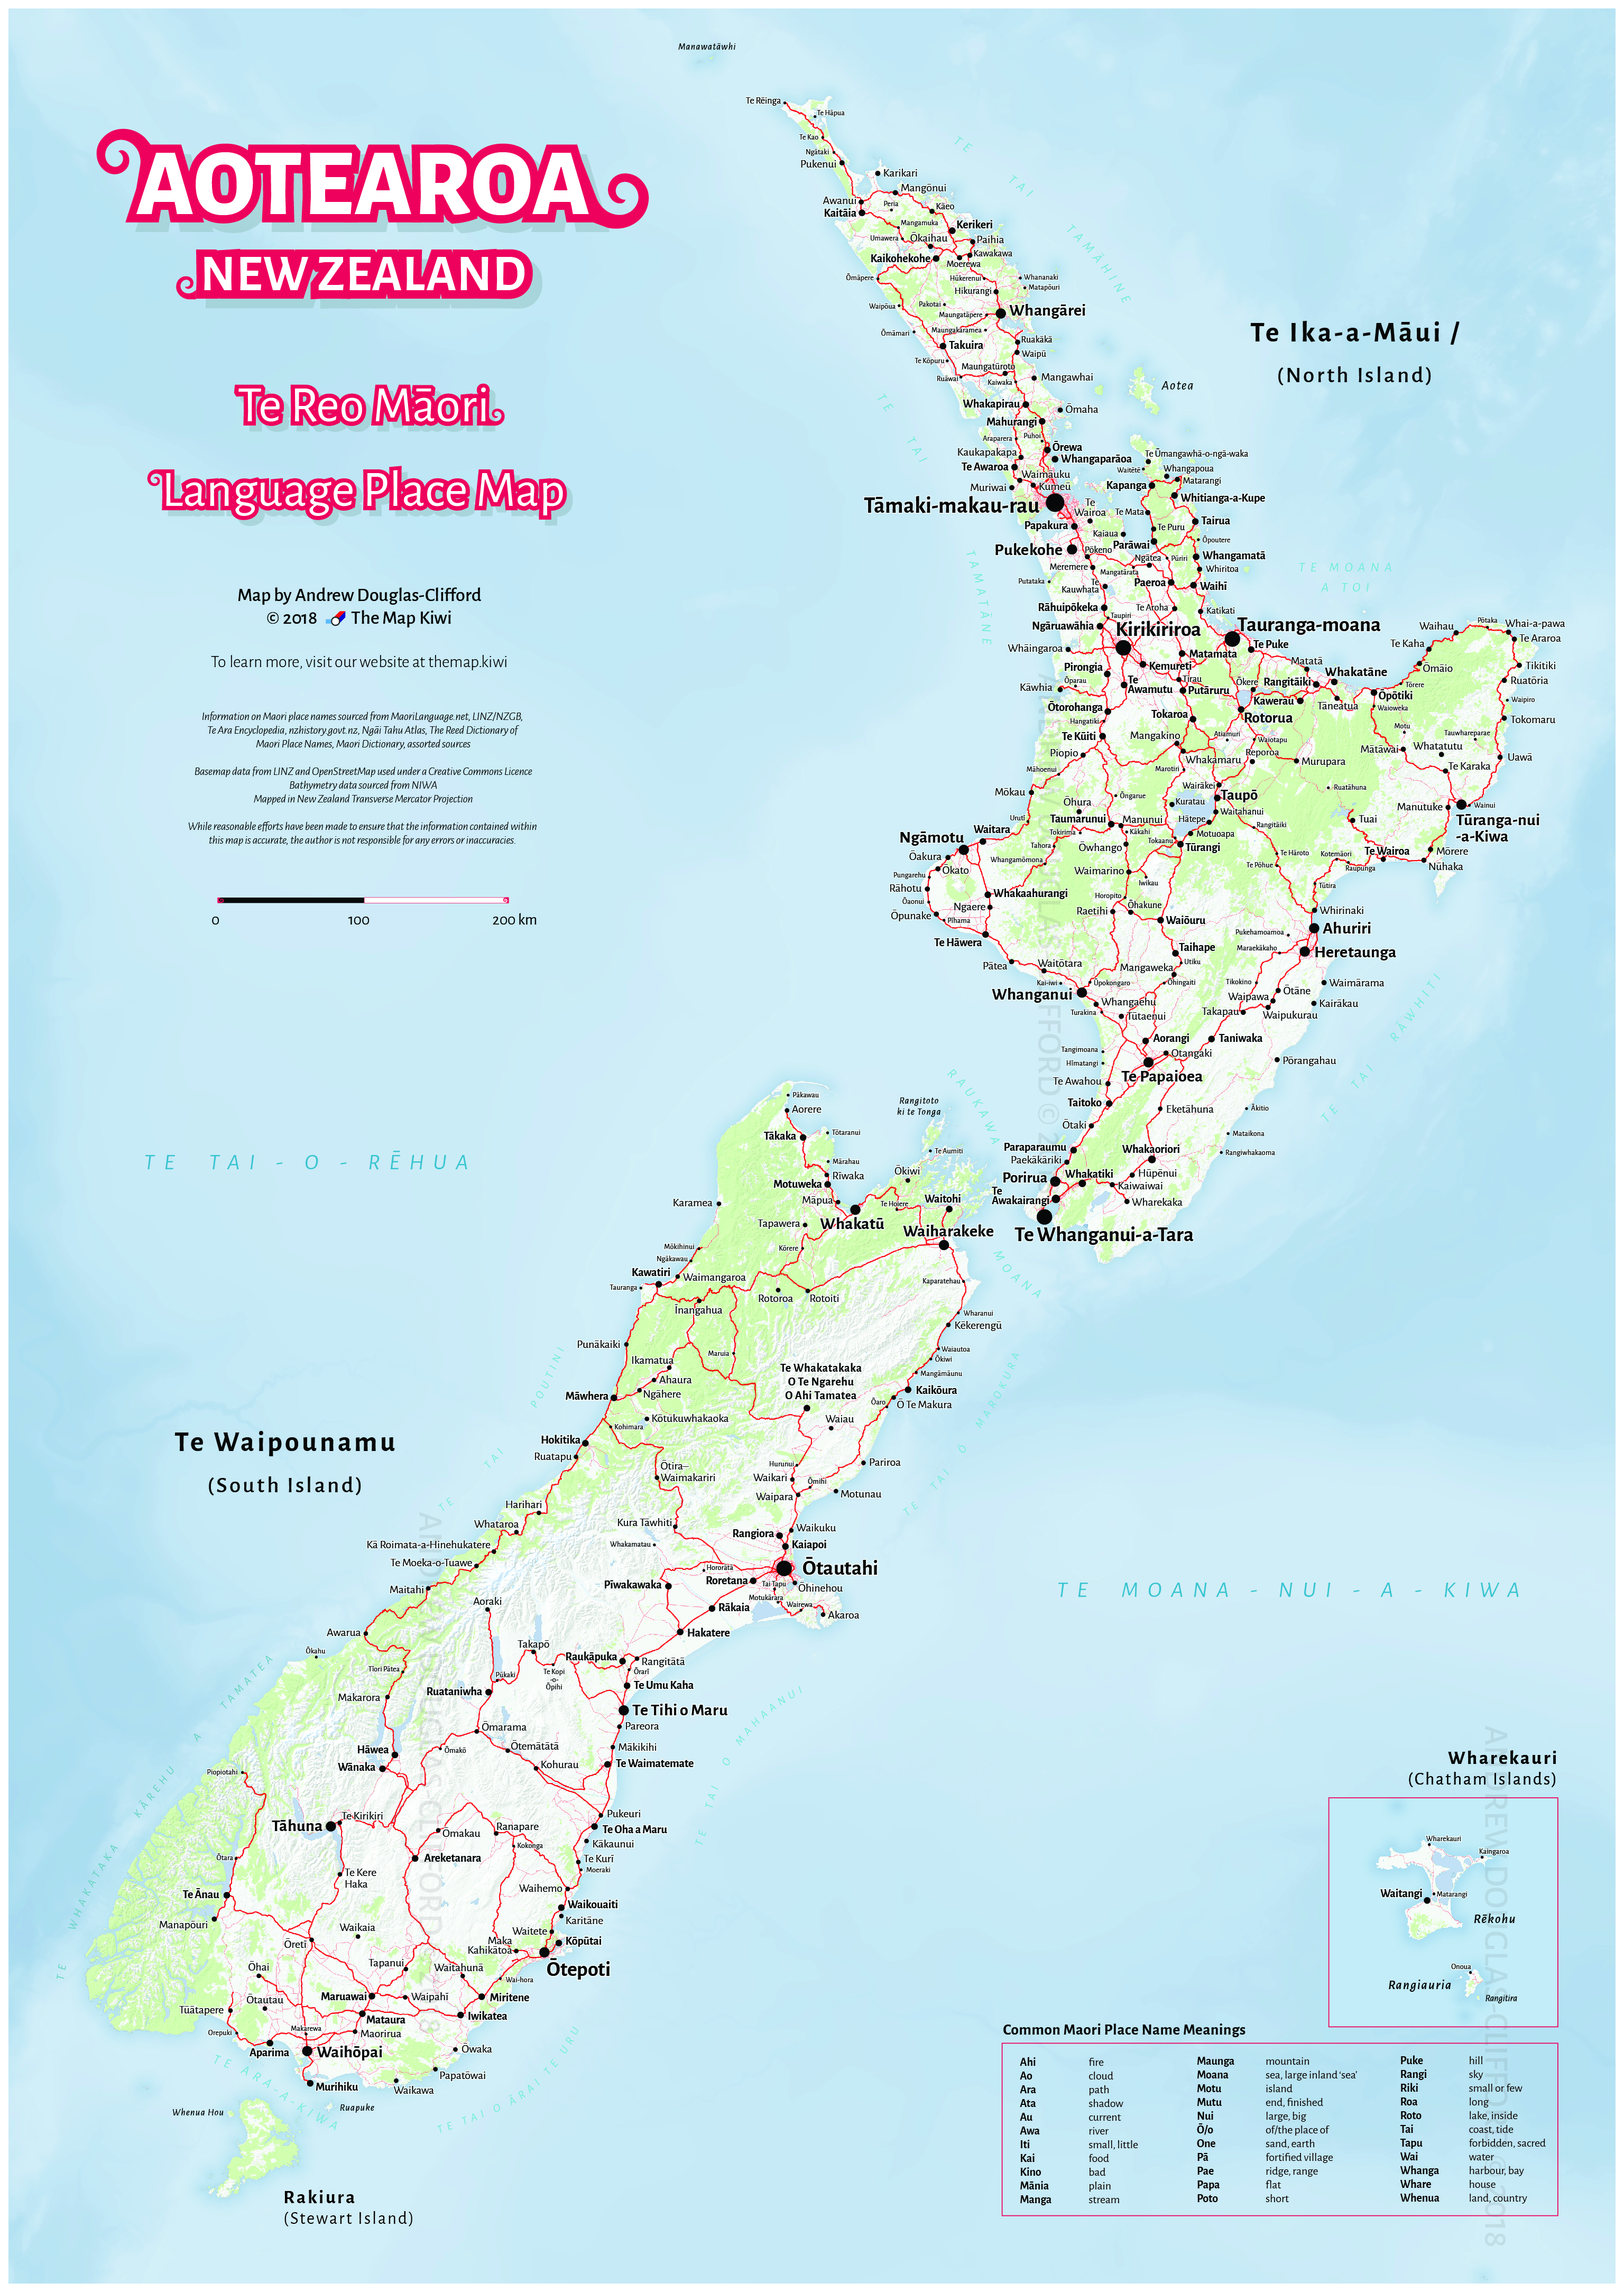 Map of New Zealand with Maori placenames